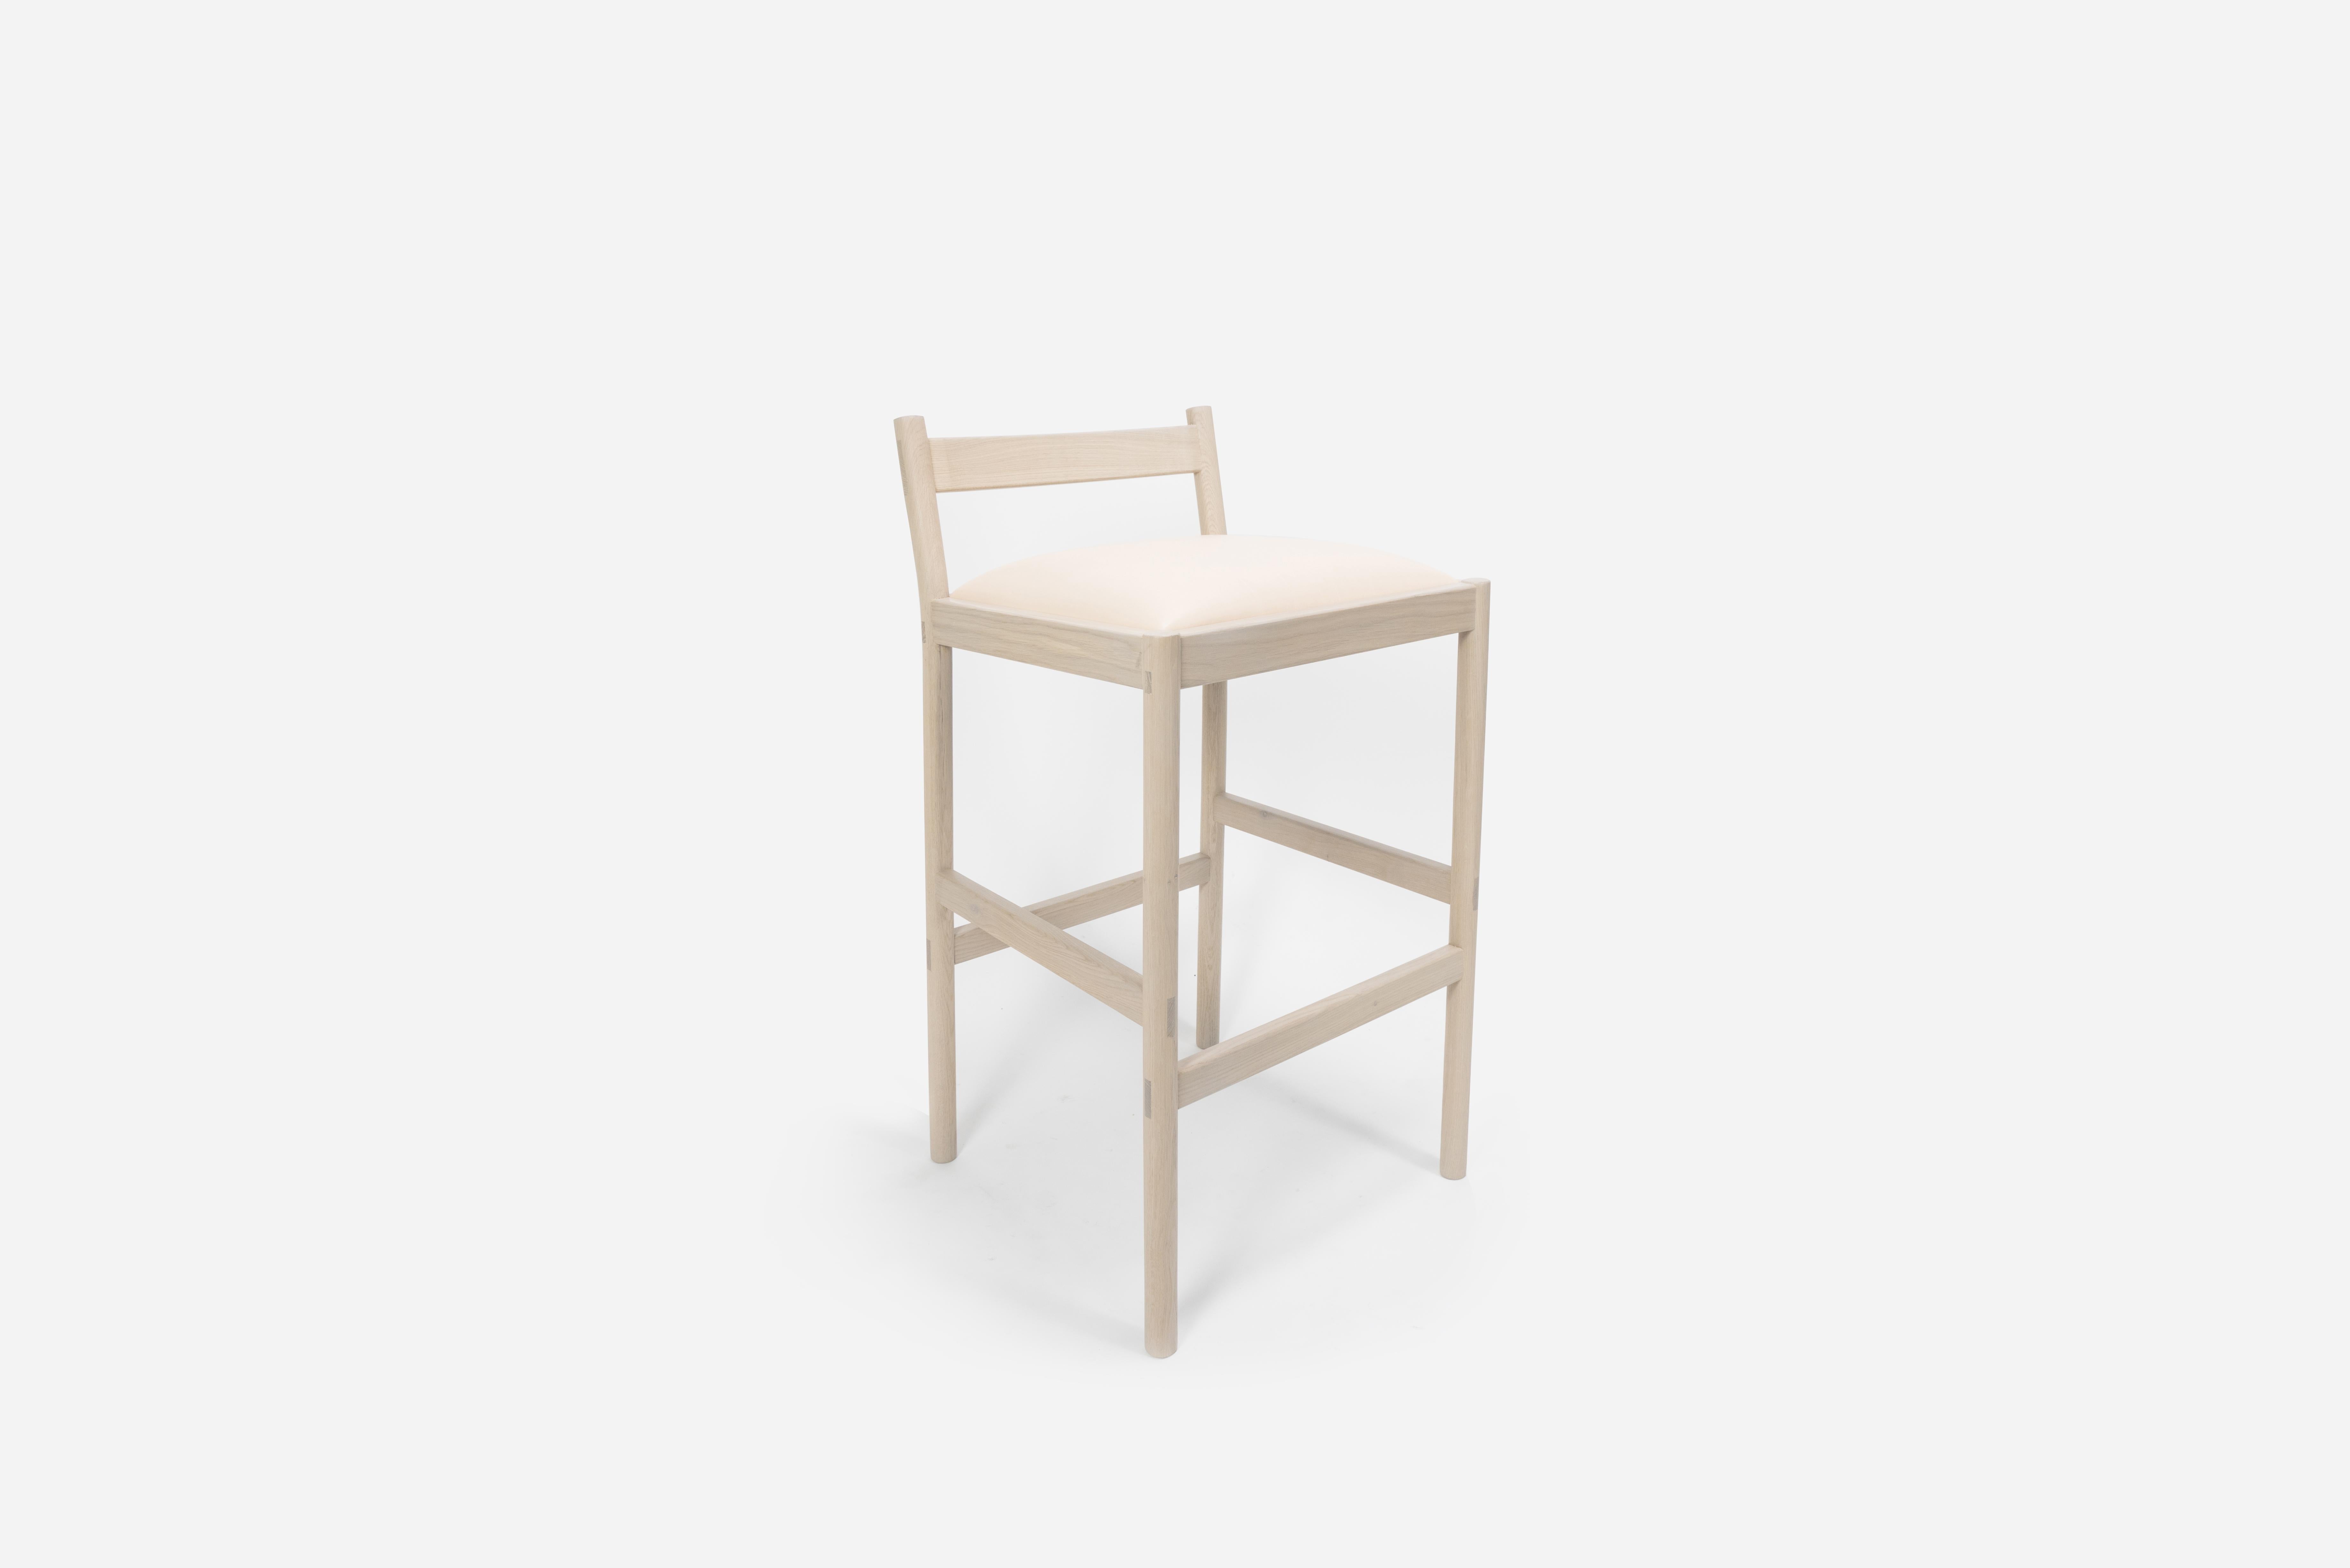 Sun at Six is a contemporary furniture design studio that works with traditional Chinese joinery masters to handcraft our pieces using traditional joinery. This minimal bar stool combines clean lines with quality material: solid white oak and